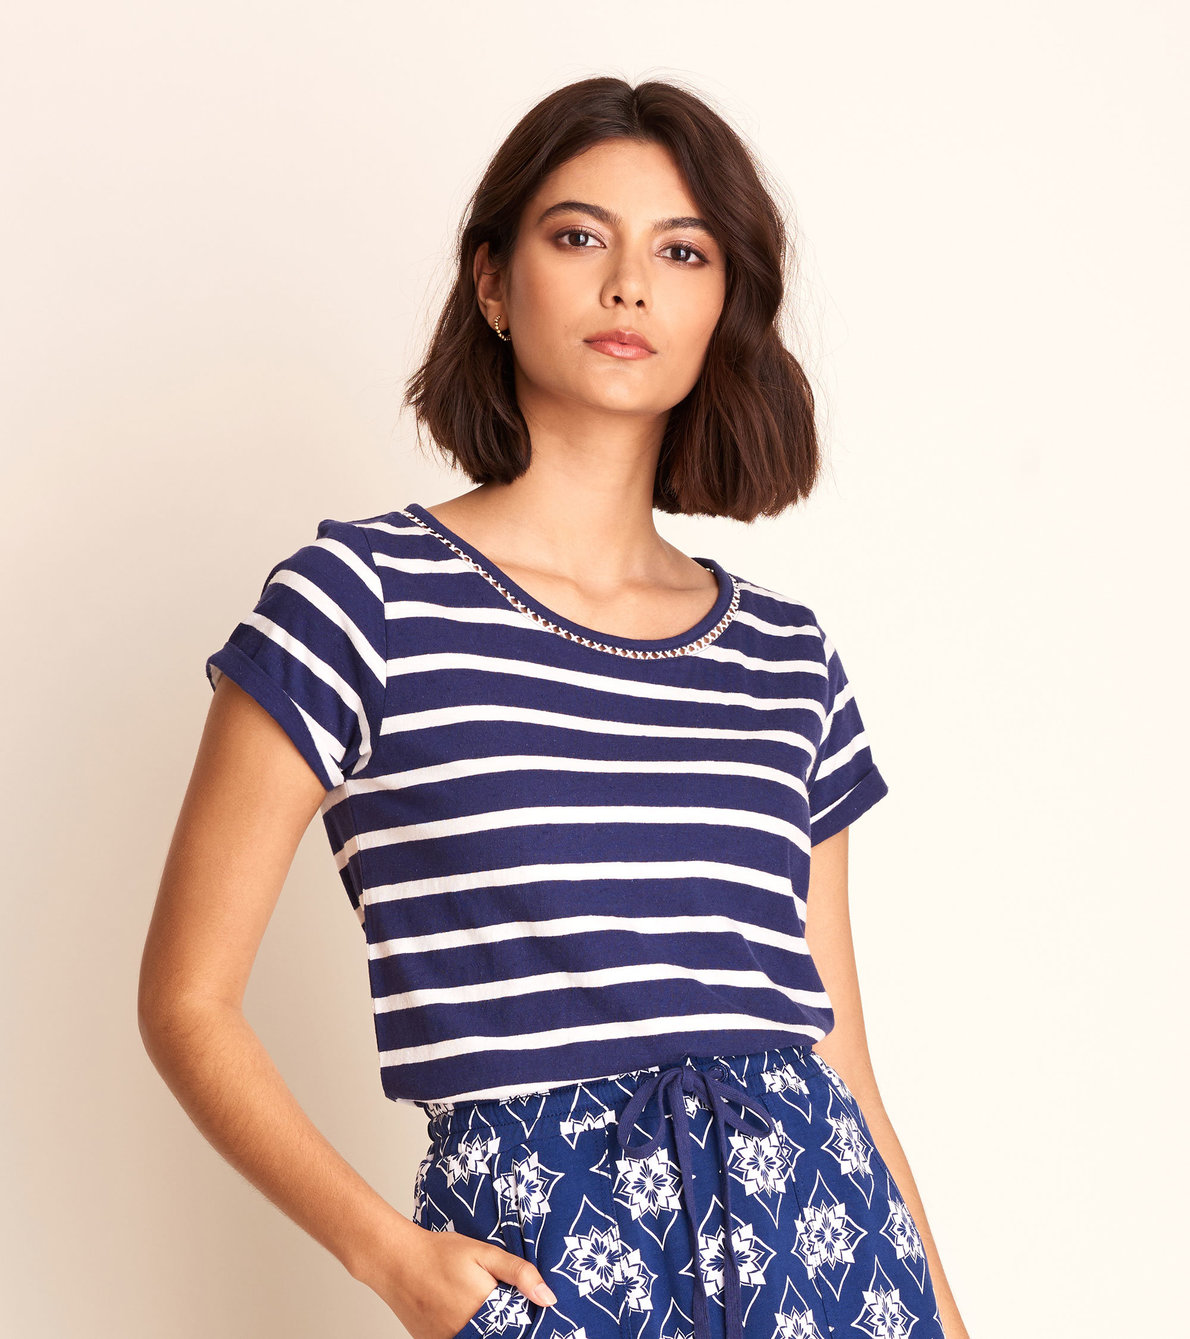 View larger image of Cotton Linen Tee - Navy and White Stripes